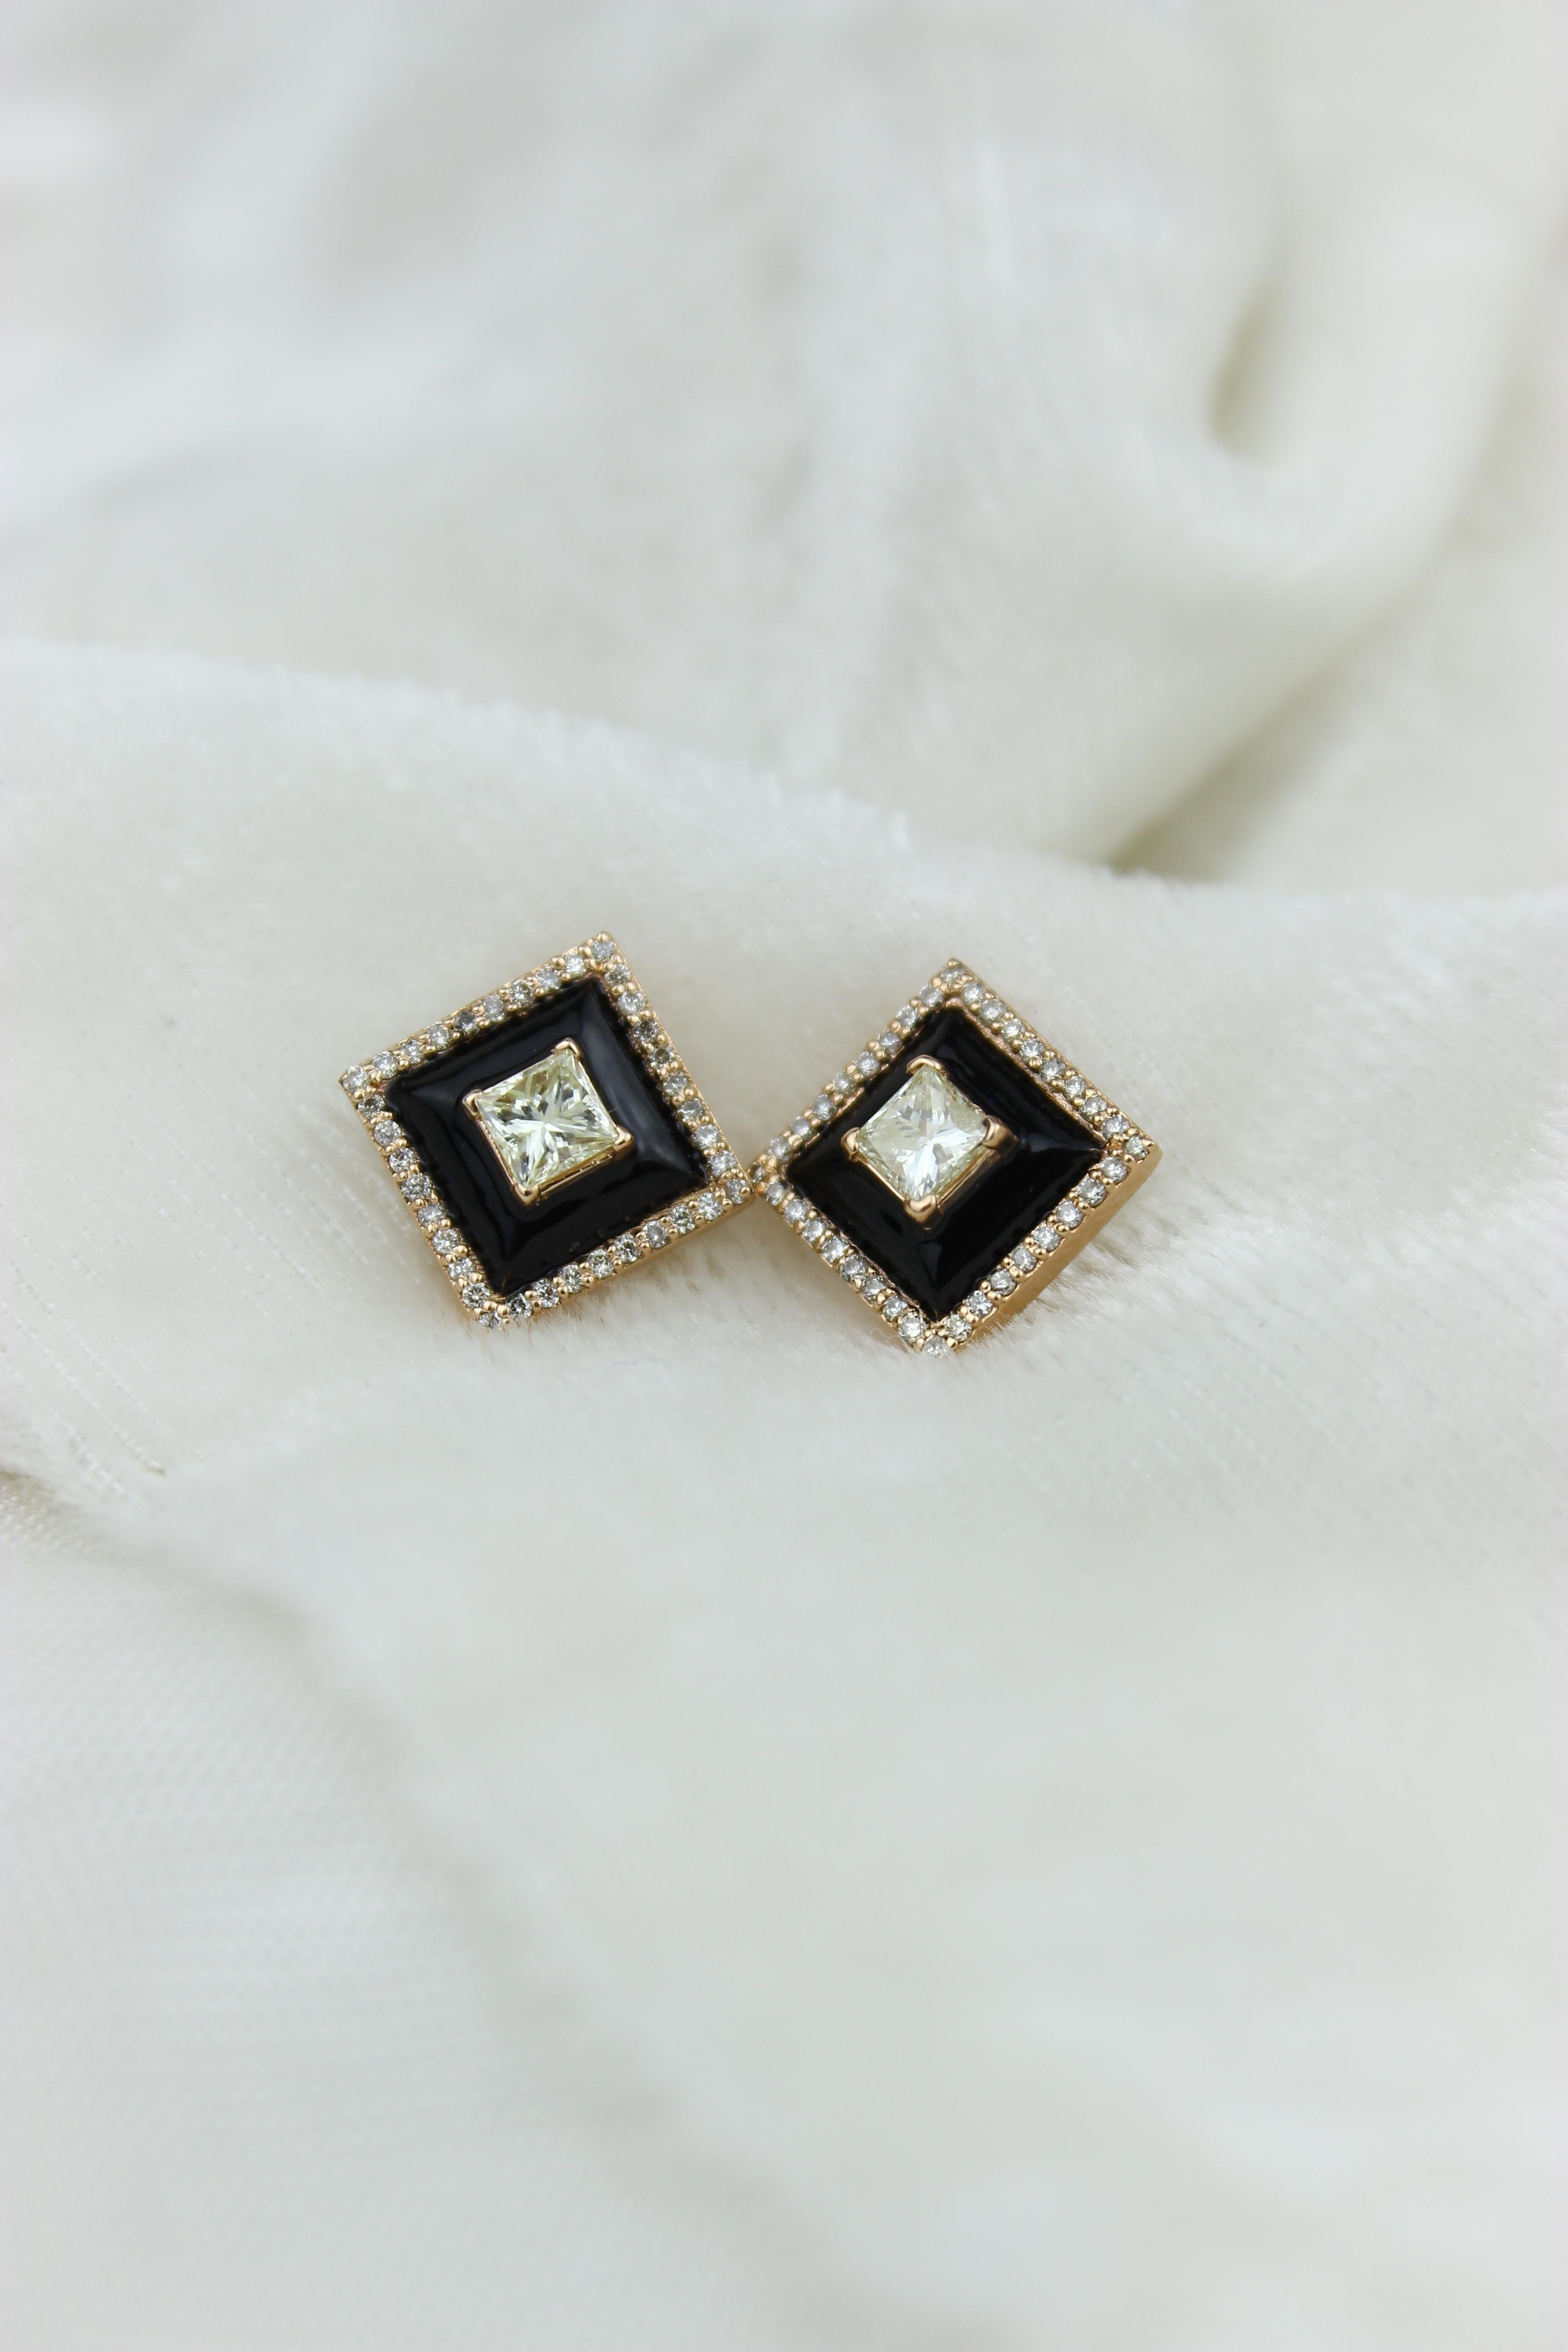 Princess Cut Black Enameled Stud Earrings with Princess Diamonds in 18k Solid Gold For Sale